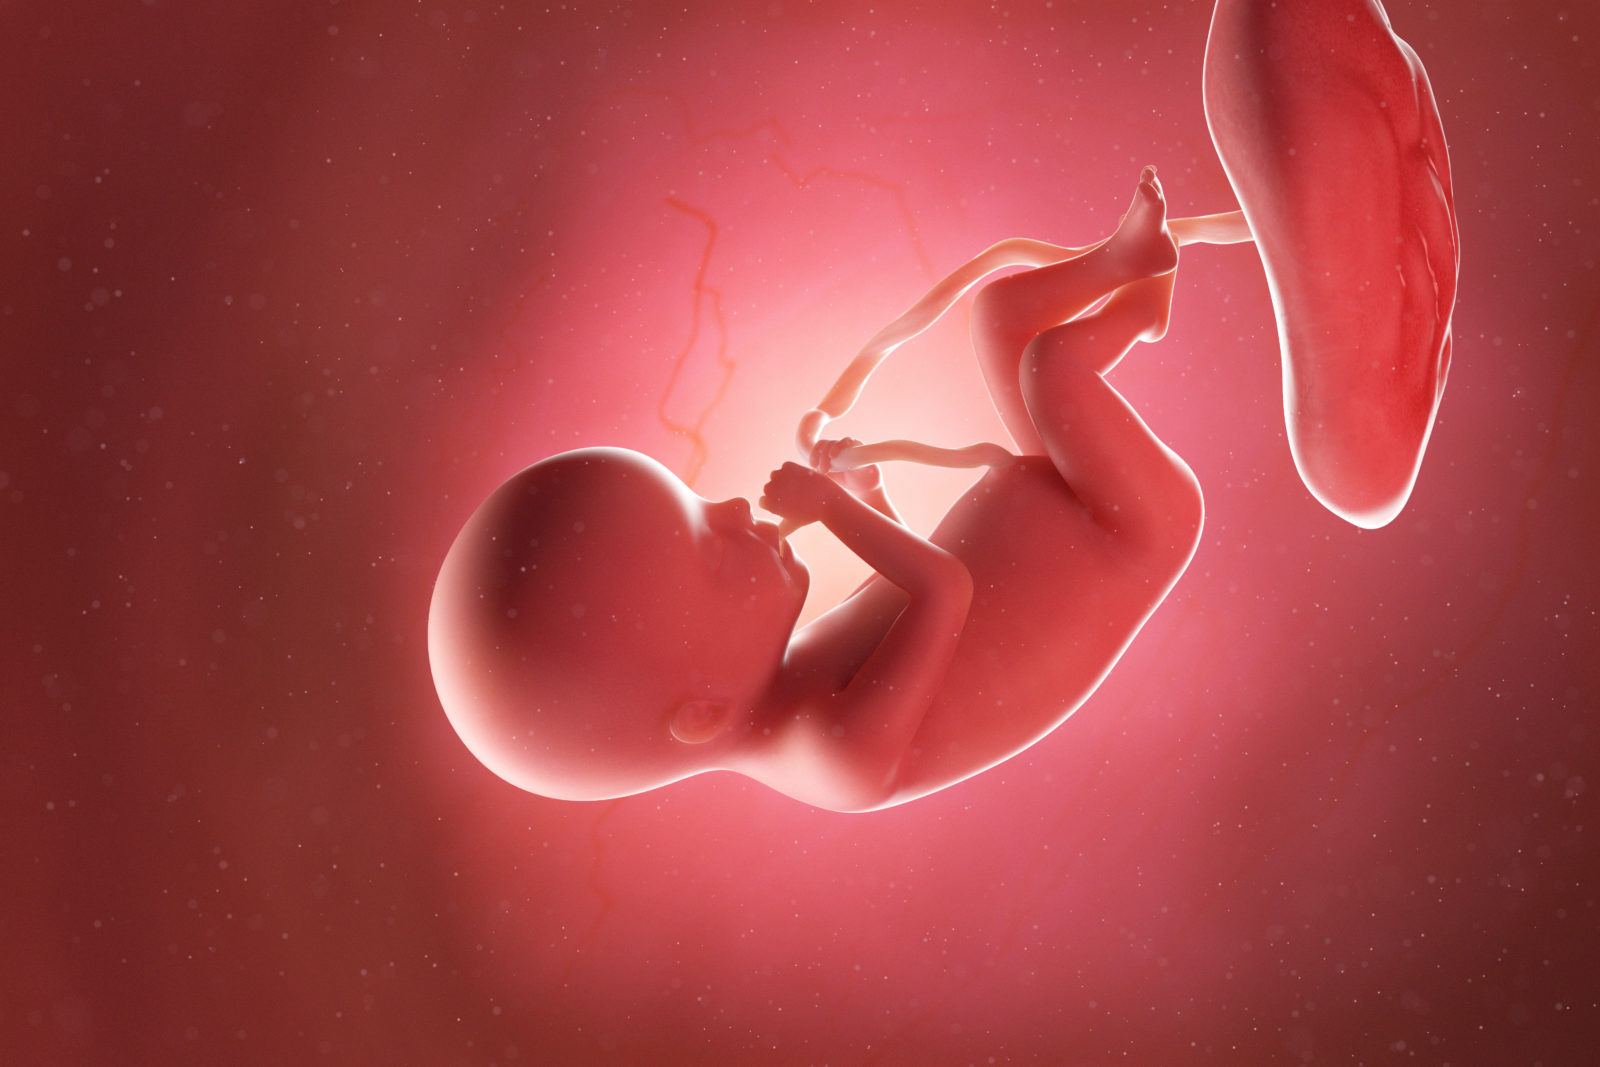 3d rendered medically accurate illustration of a fetus at week 20